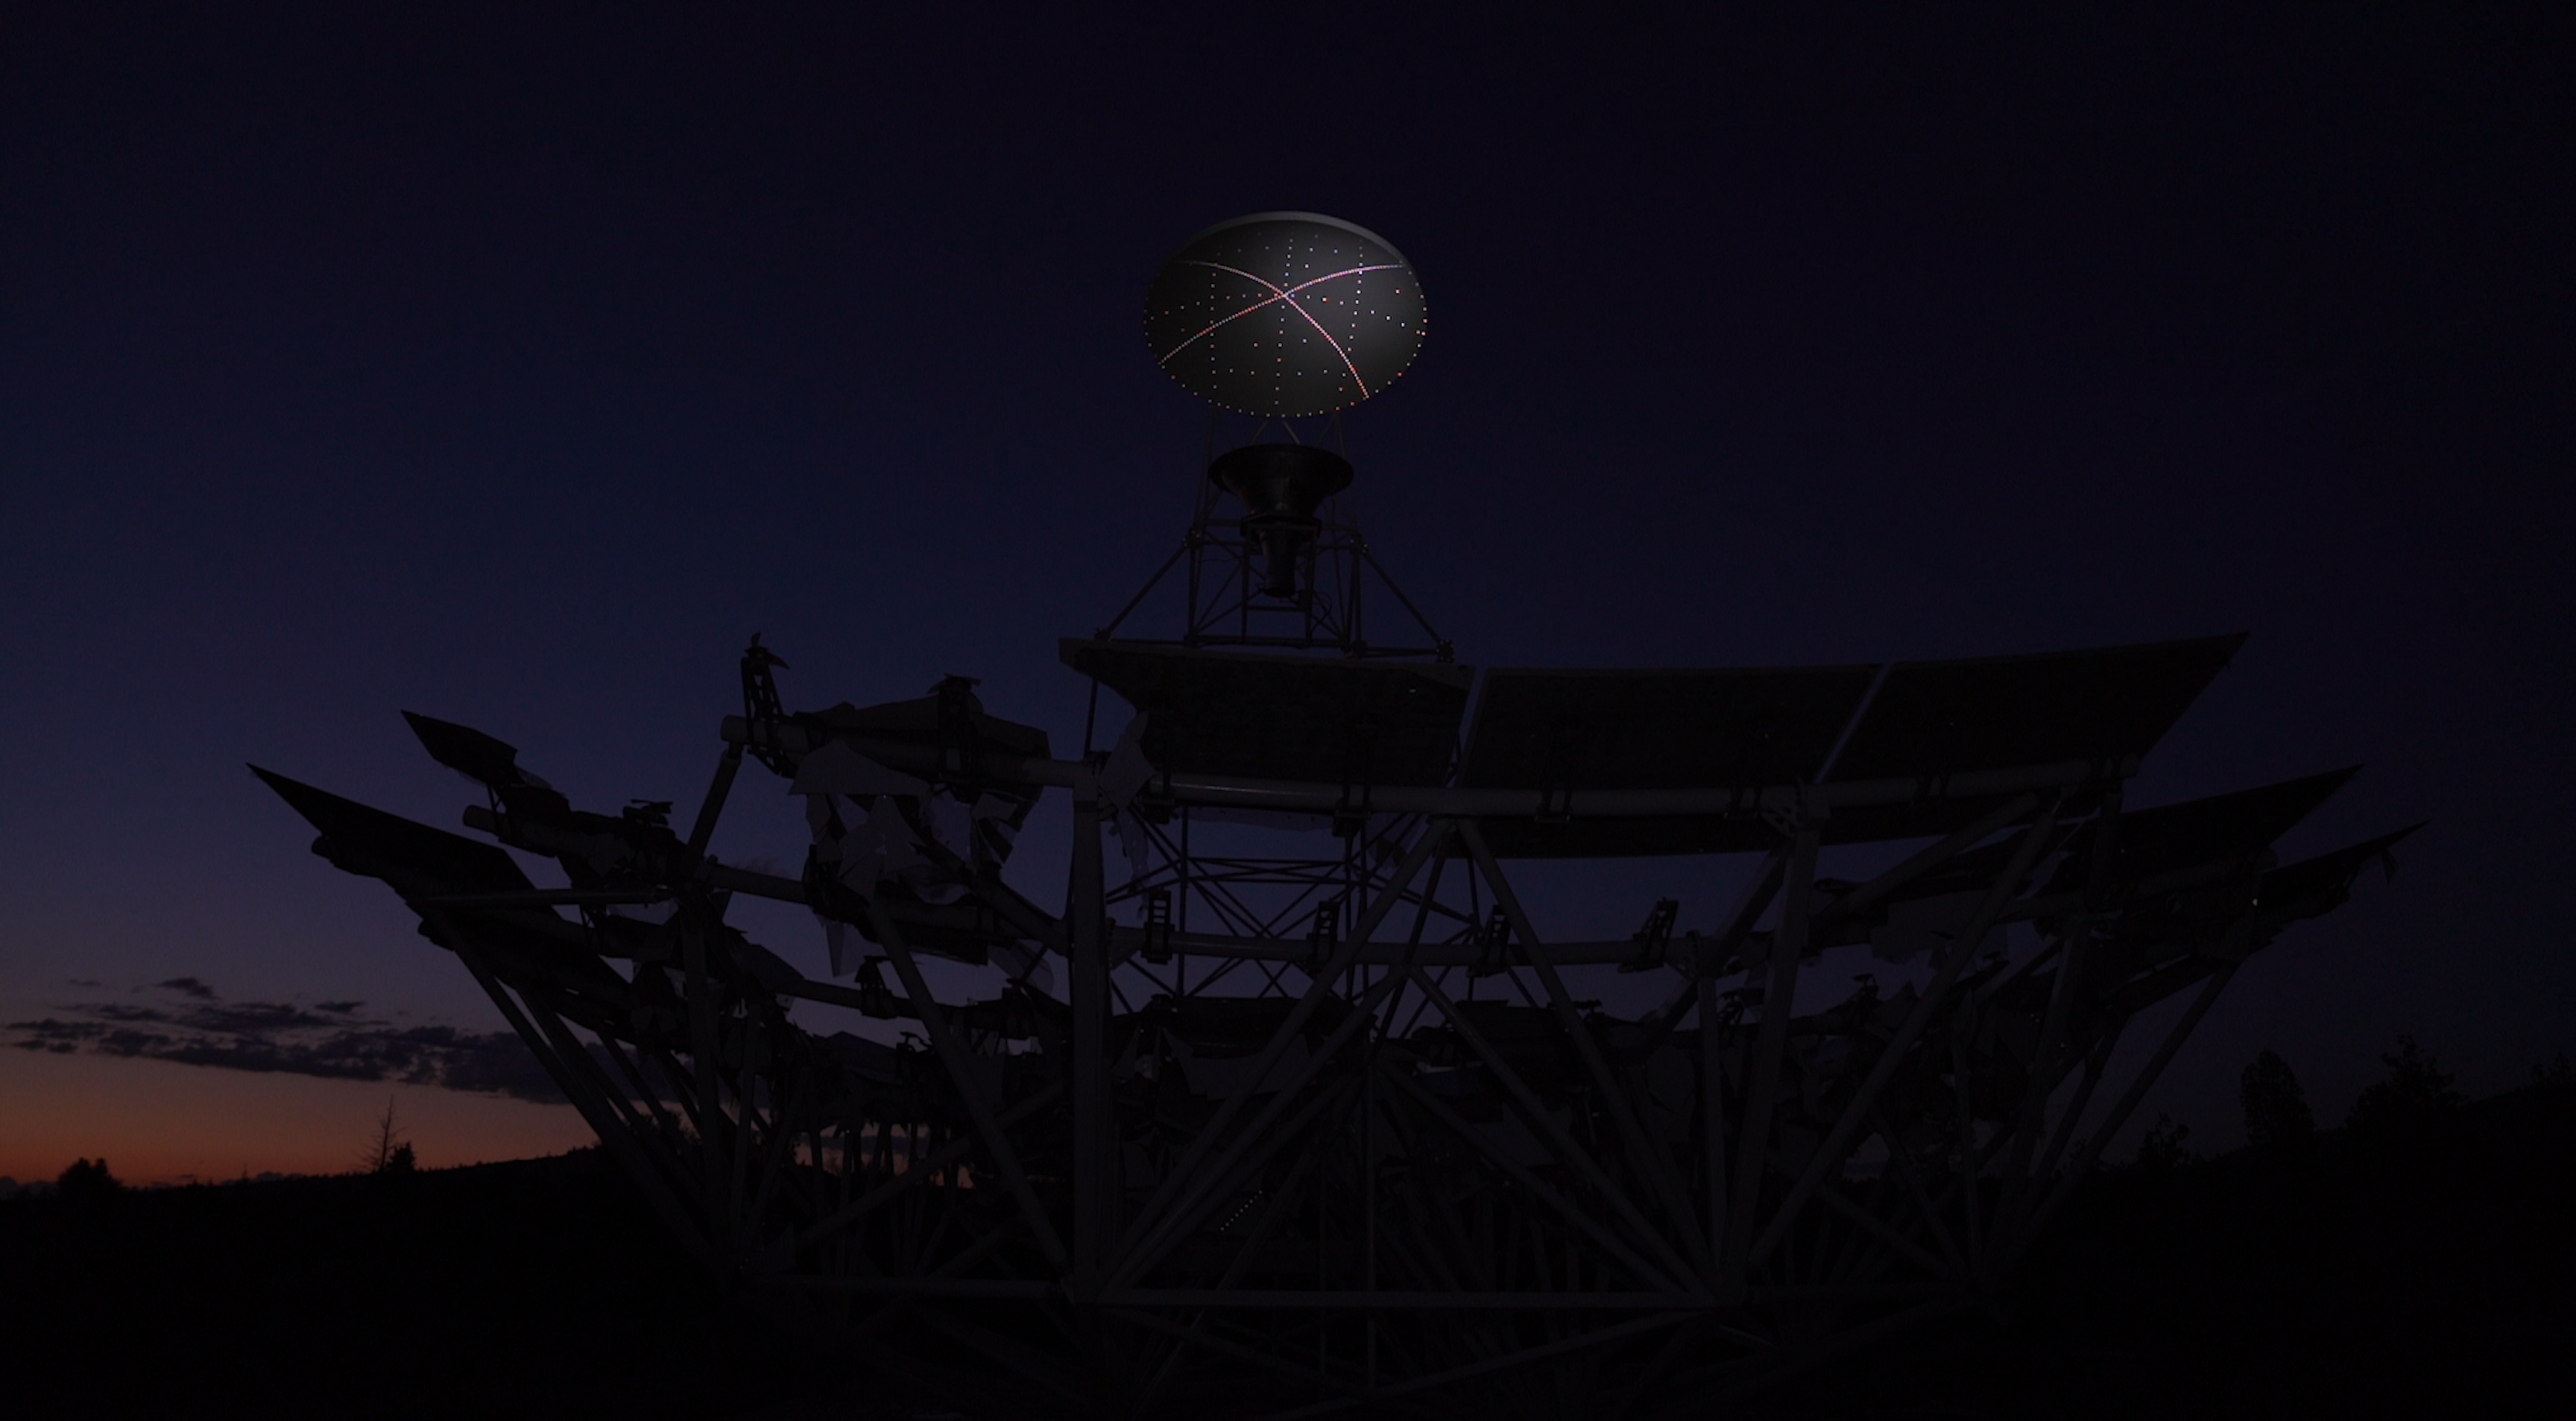 Image: Brittany Nelson, still frame from "I can't make you love me," single channel video, 2024. The Allen telescope, a many-faceted structure, is silhouetted in the foreground, much of its detail is hard to see. Behind it, is a barely lit horizon. Image courtesy of Patron Gallery.